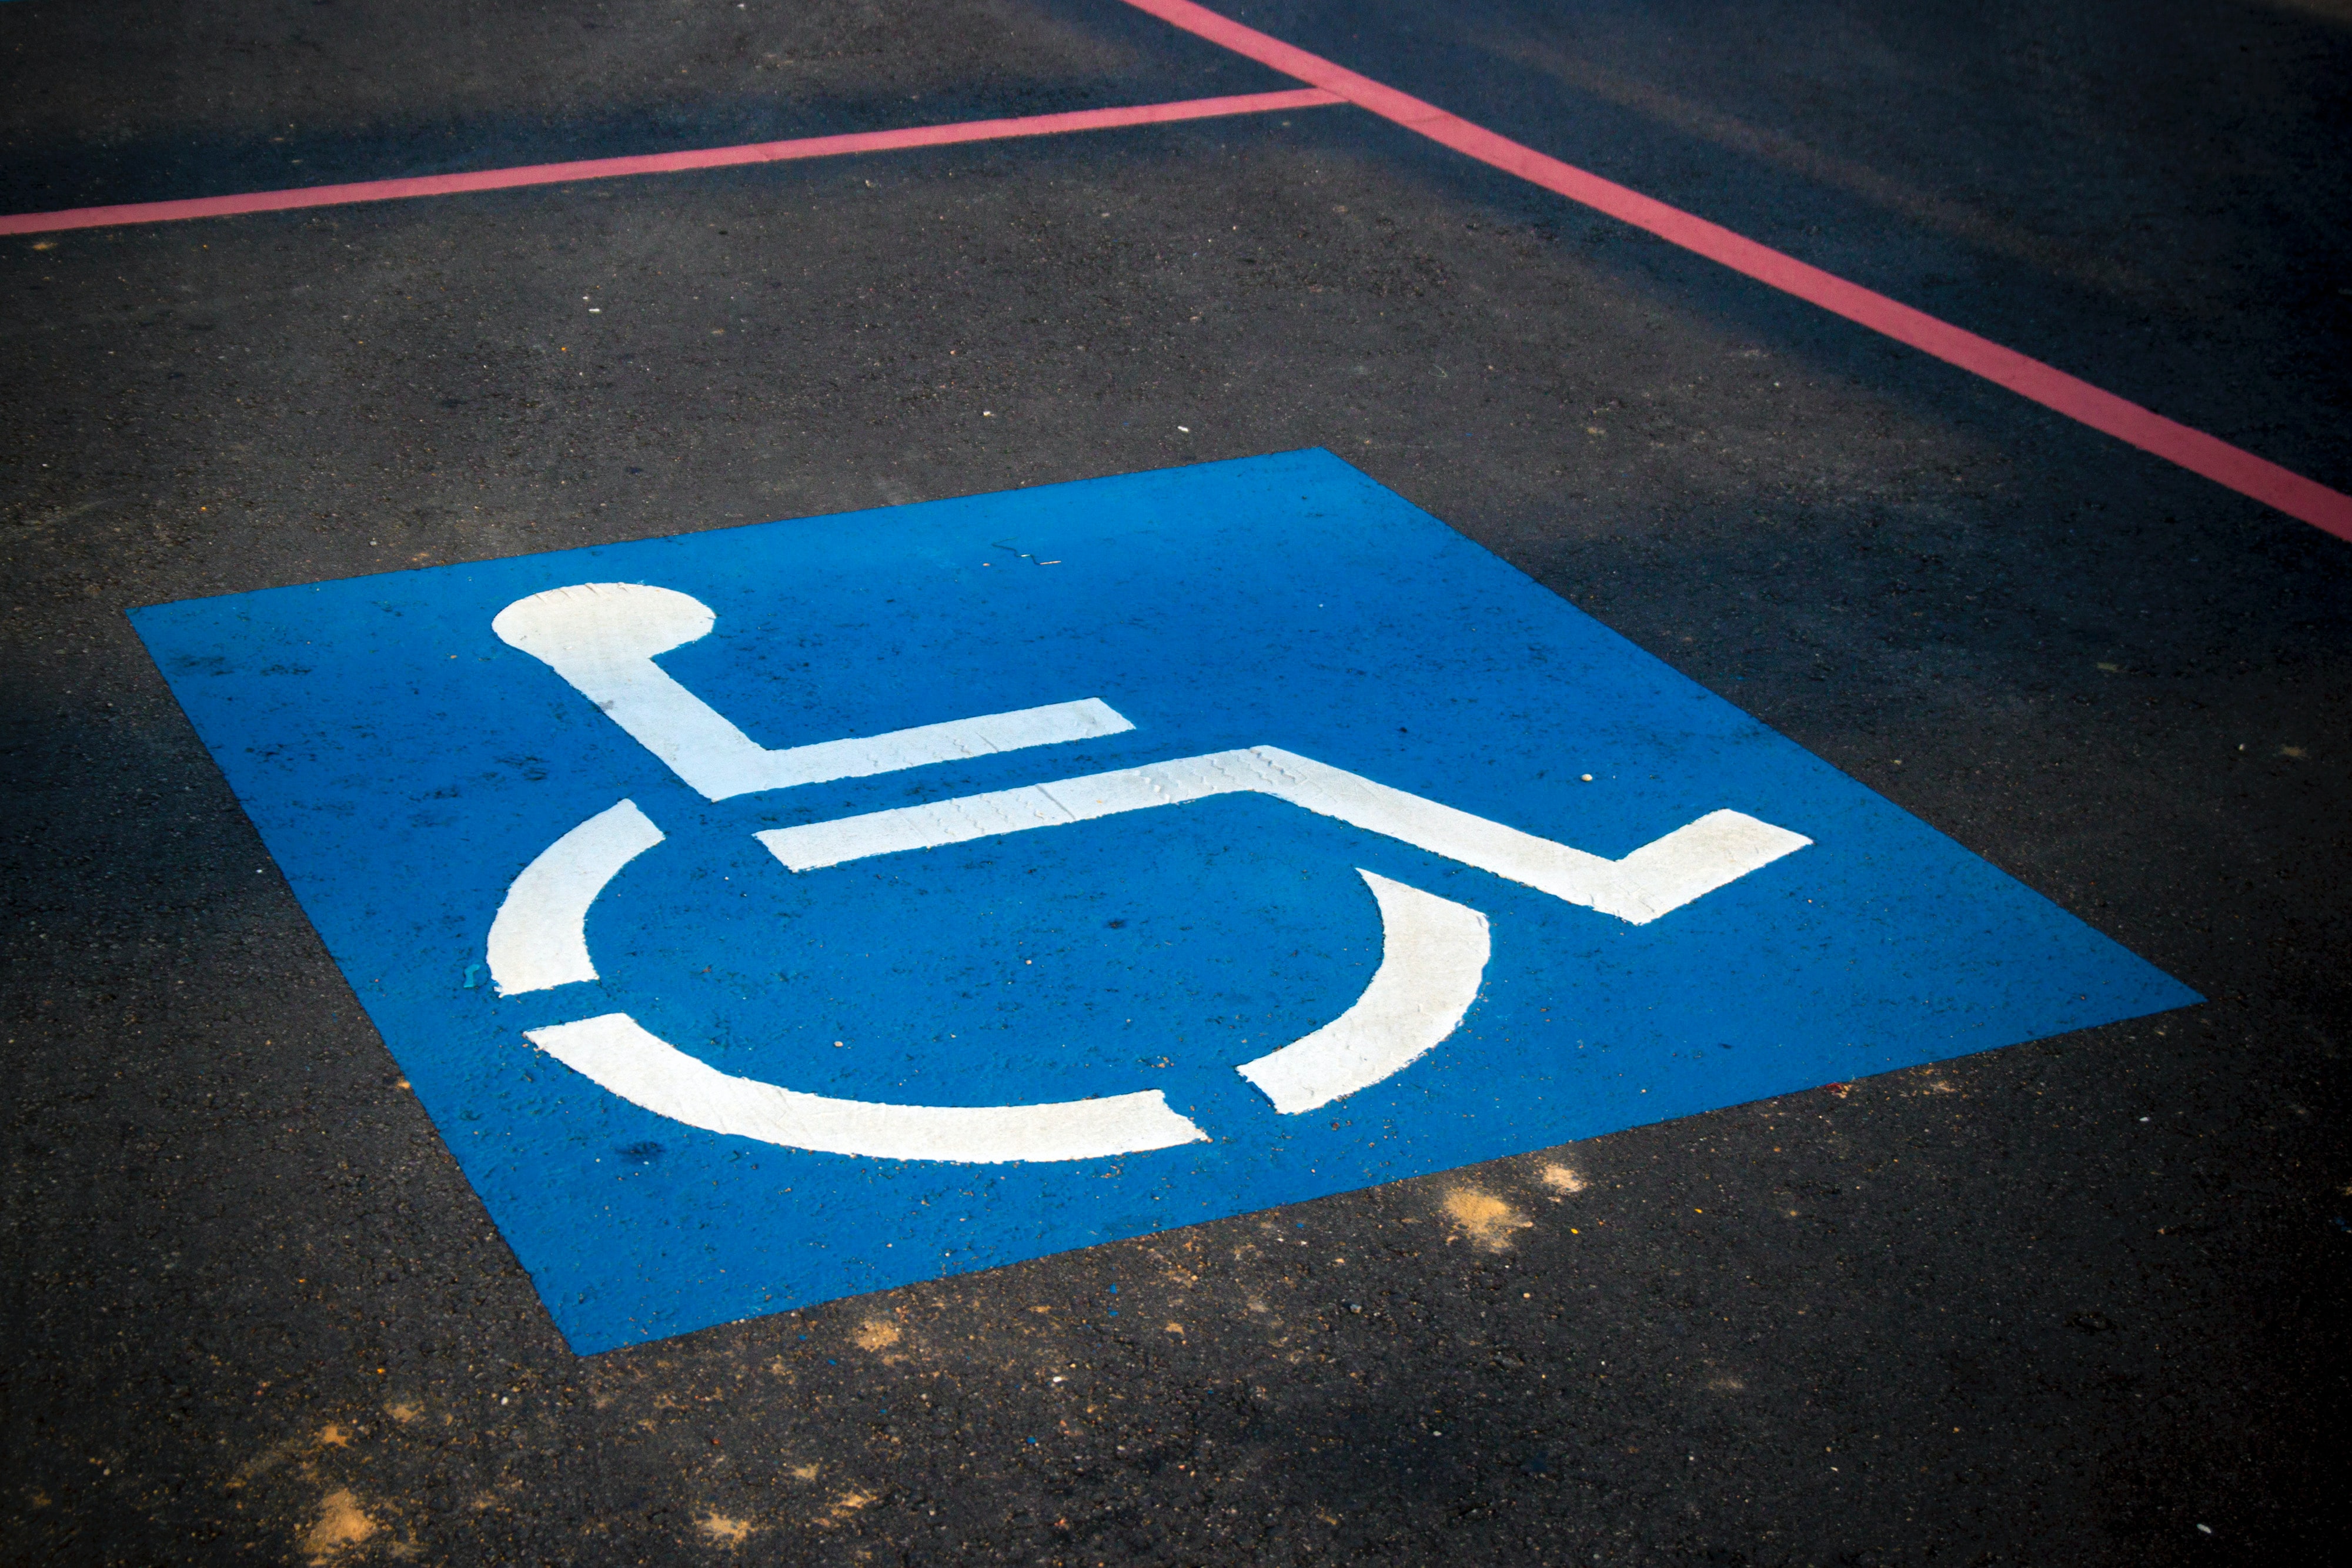 A parking spot with the international sign for accessible parking spraypainted on it